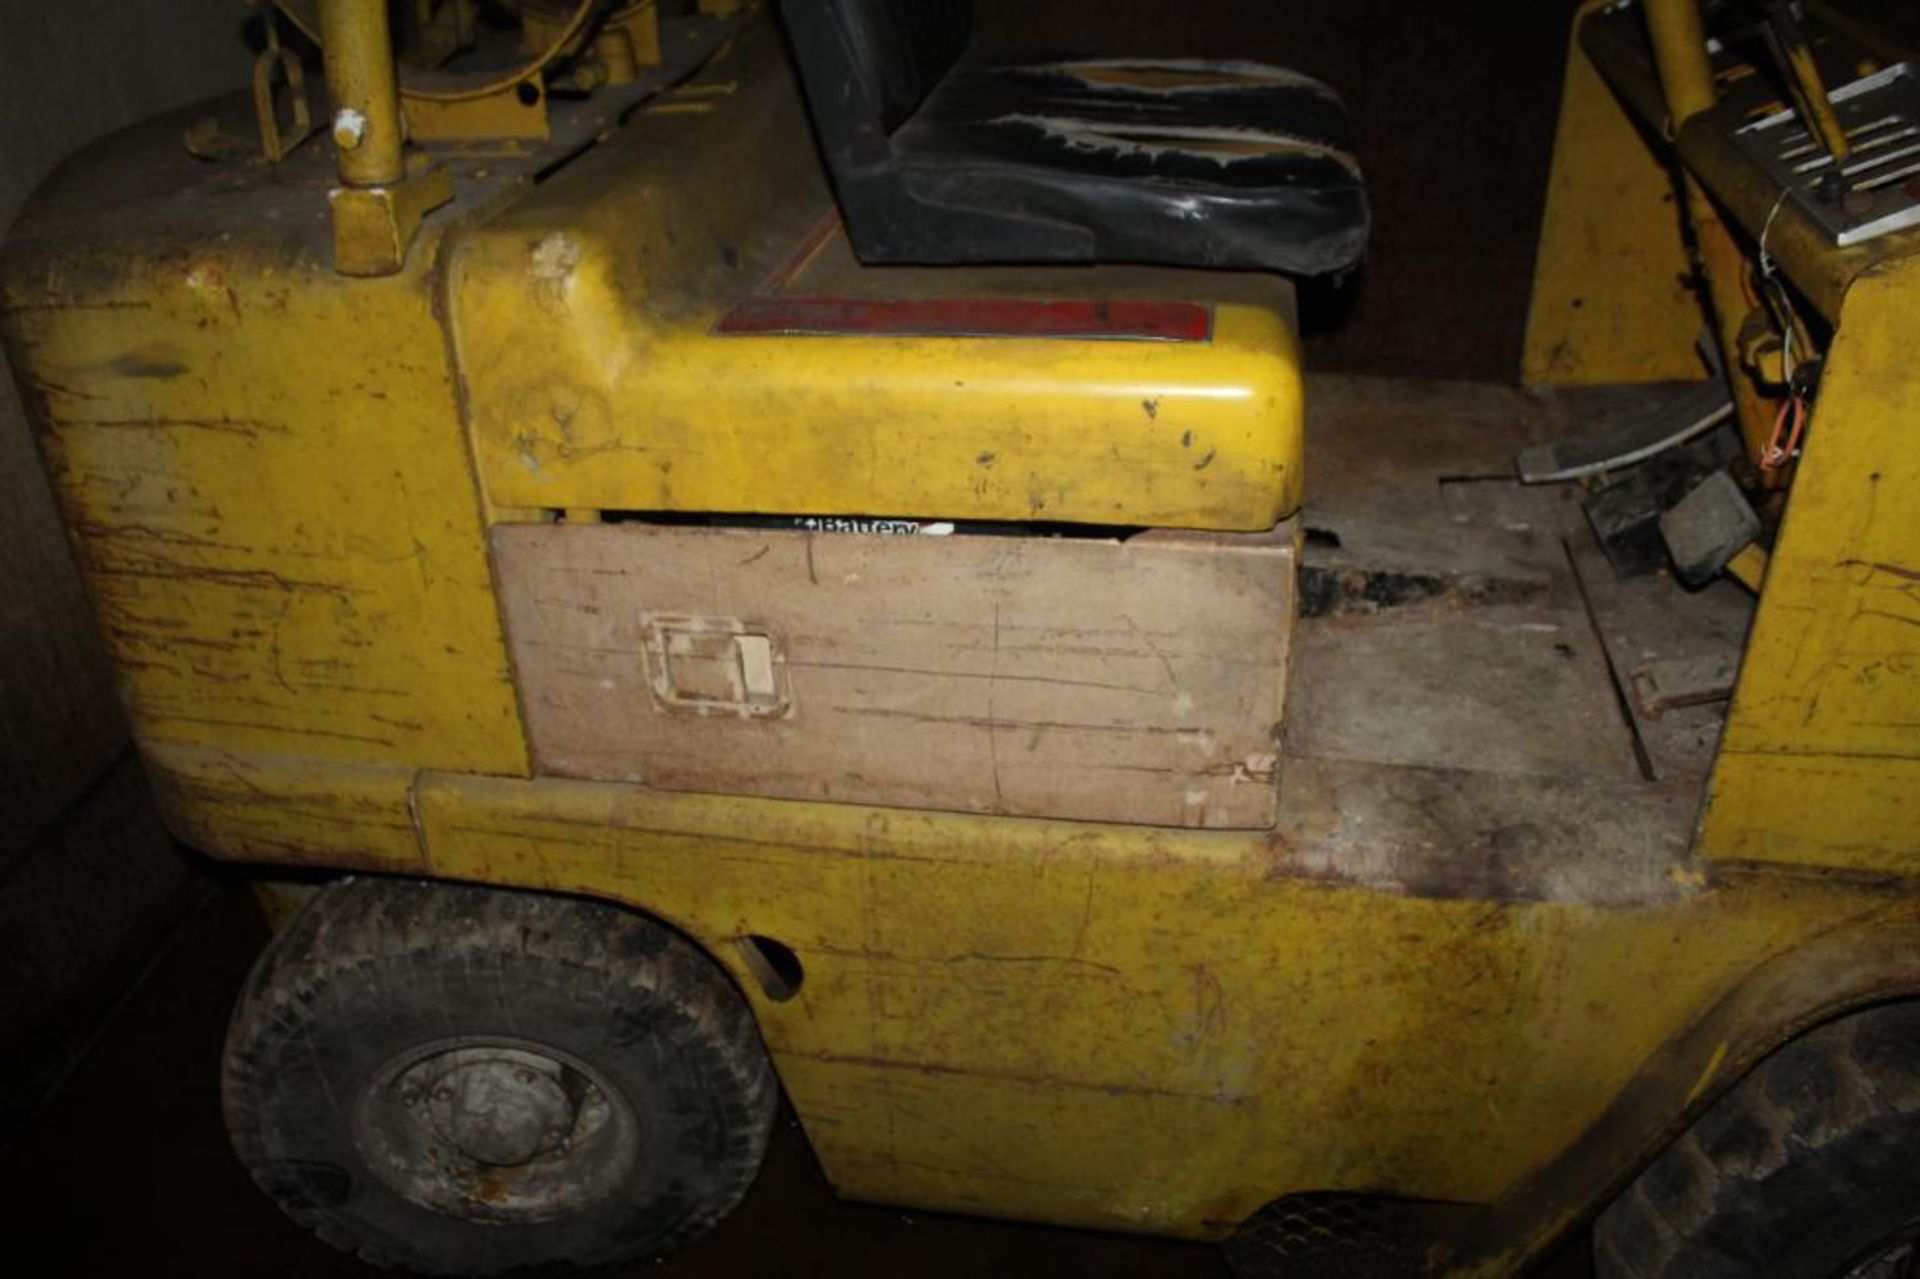 Caterpillar Tow Motor Forklift - Runs but has hydraulic issues and overheats - Image 5 of 16